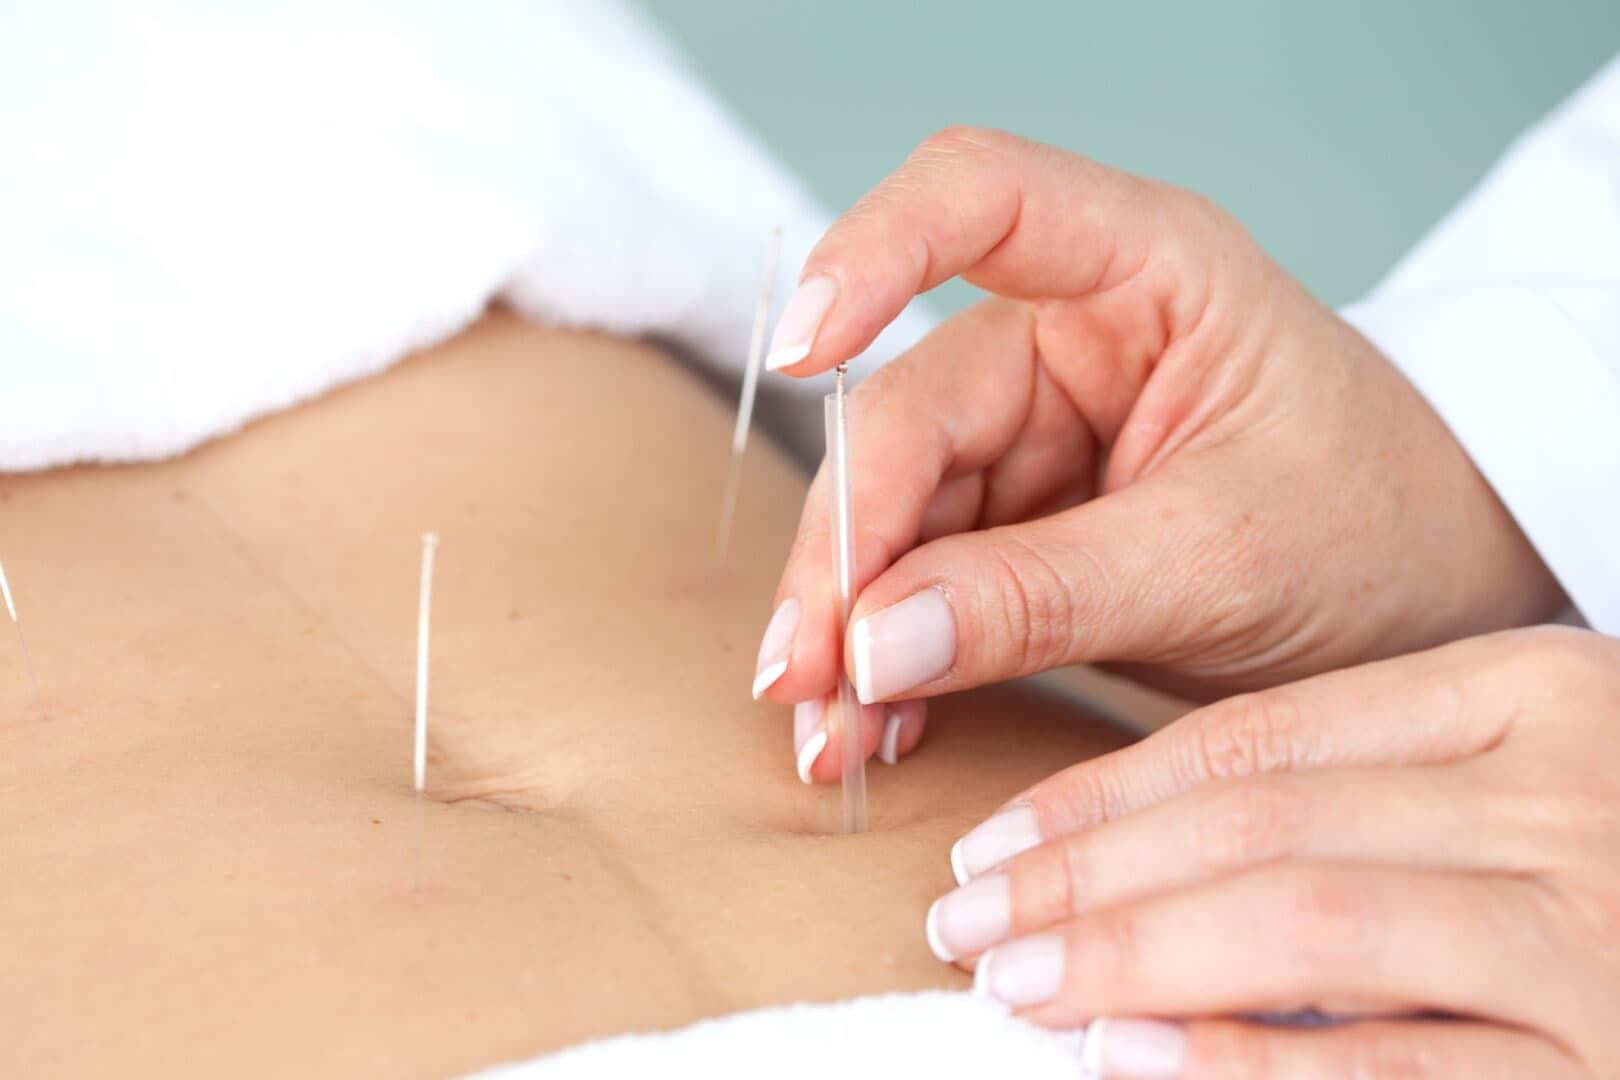 Acupuncture for fertility: What to know if you’re trying to conceive